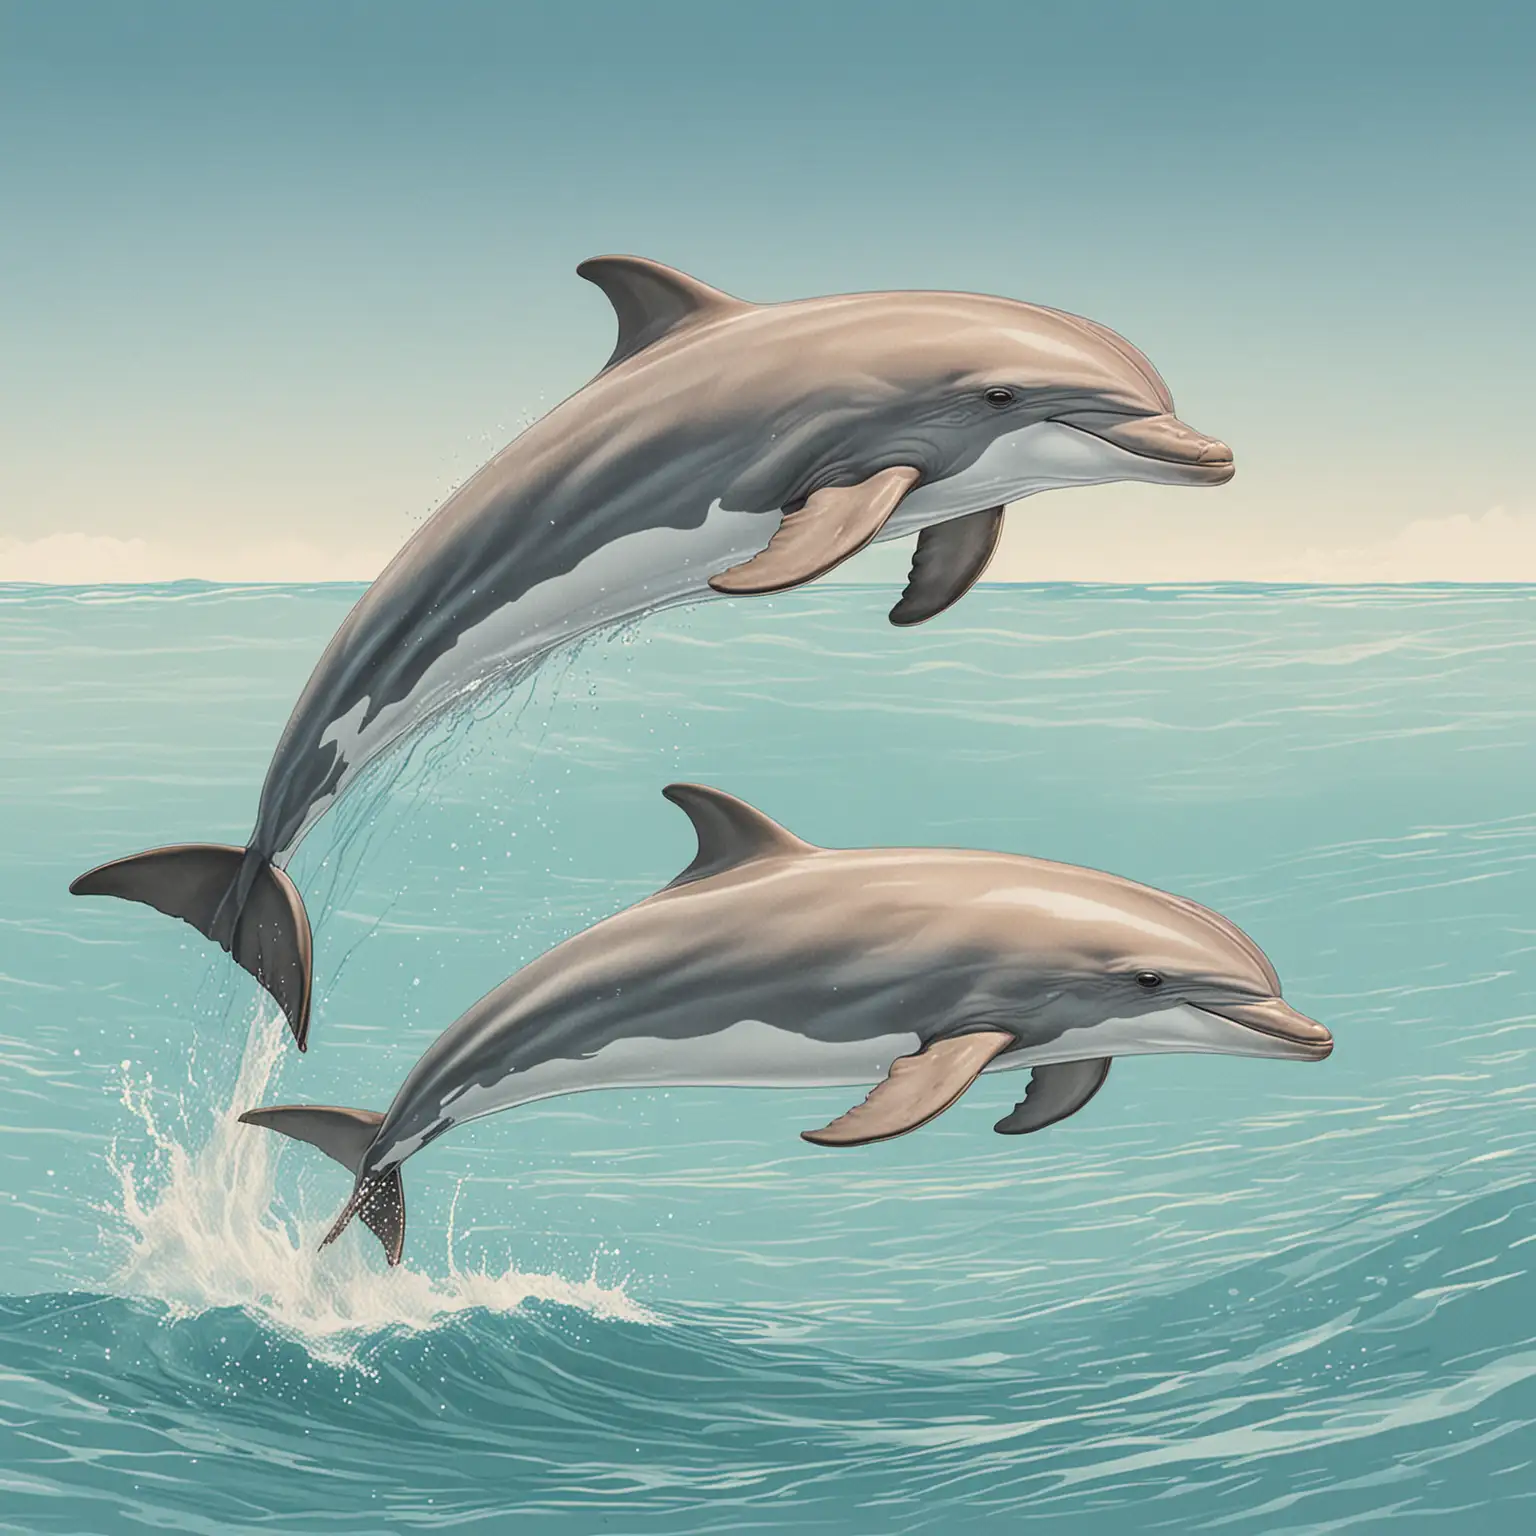 Simple colored in line drawing of a male and female dolphin joyously swimming in the ocean